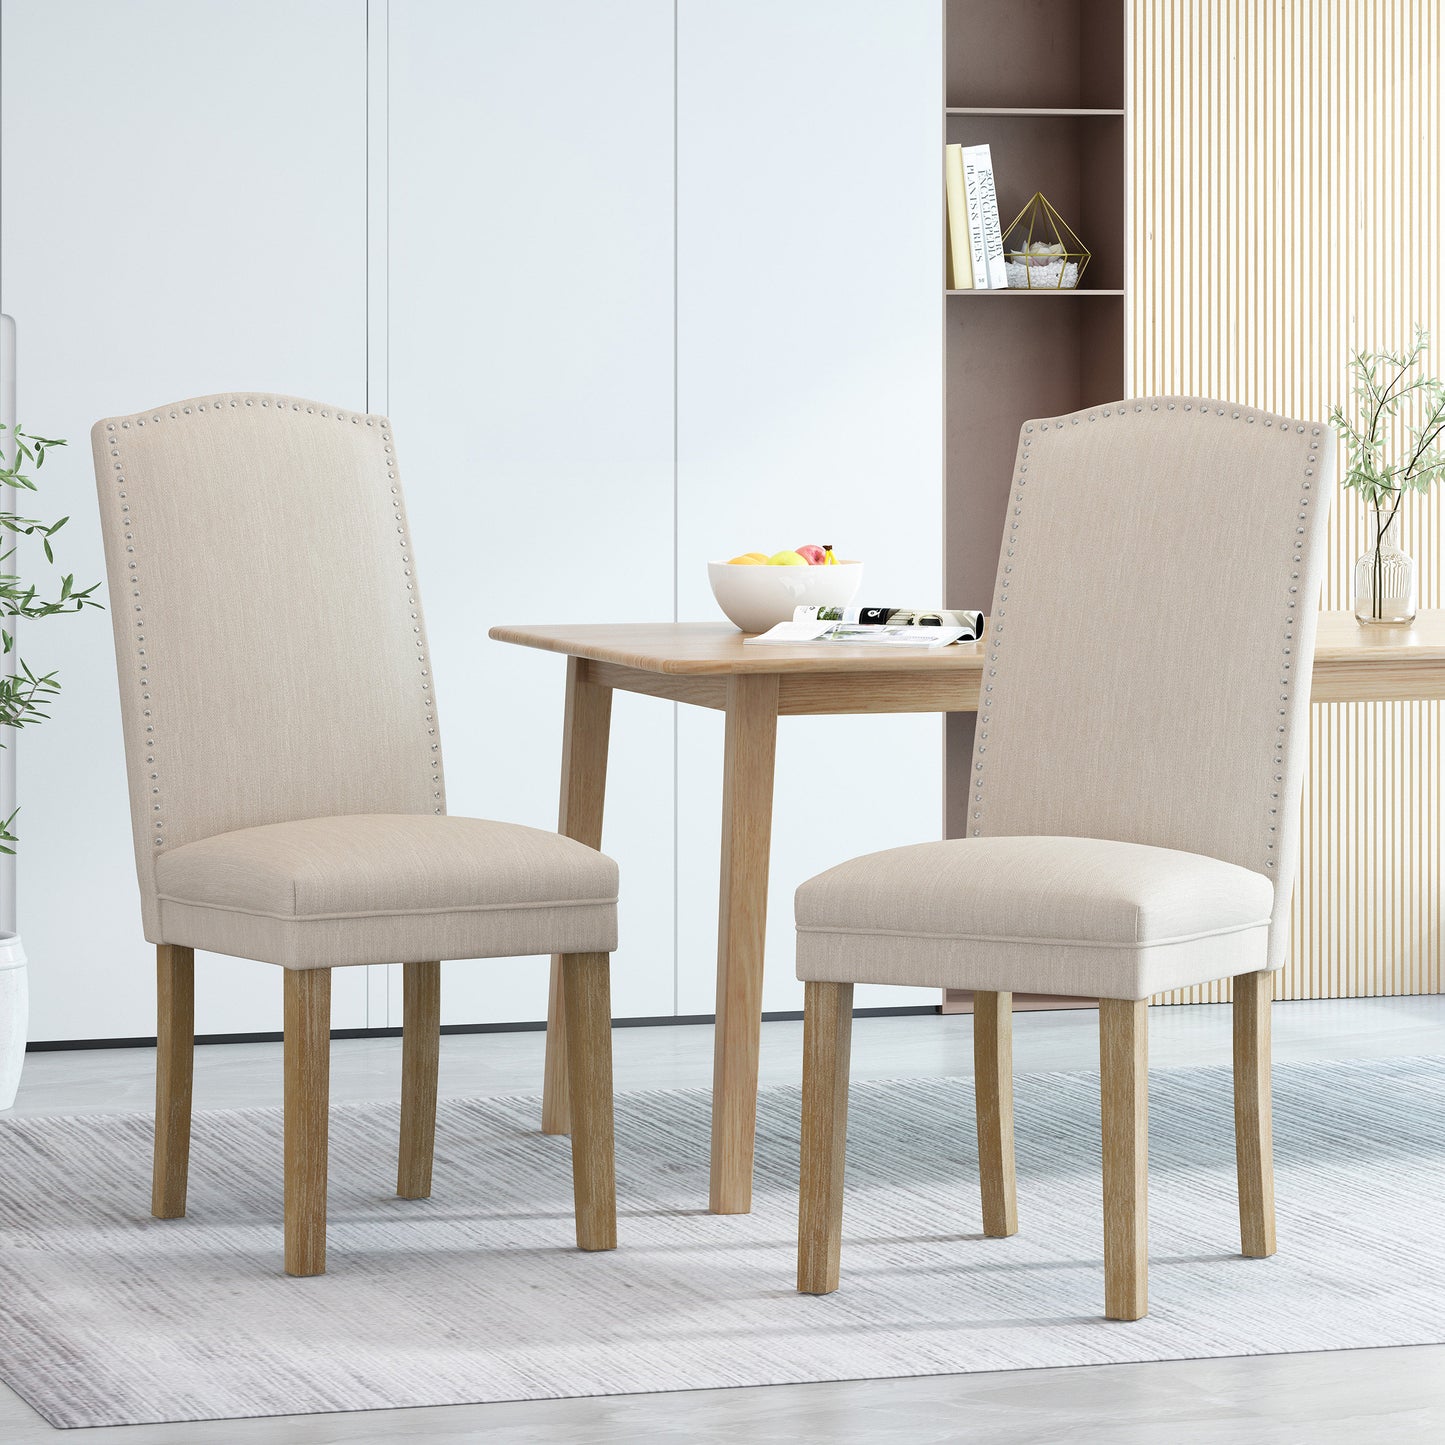 Geromin Contemporary Fabric Dining Chairs with Nailhead Trim, Set of 2